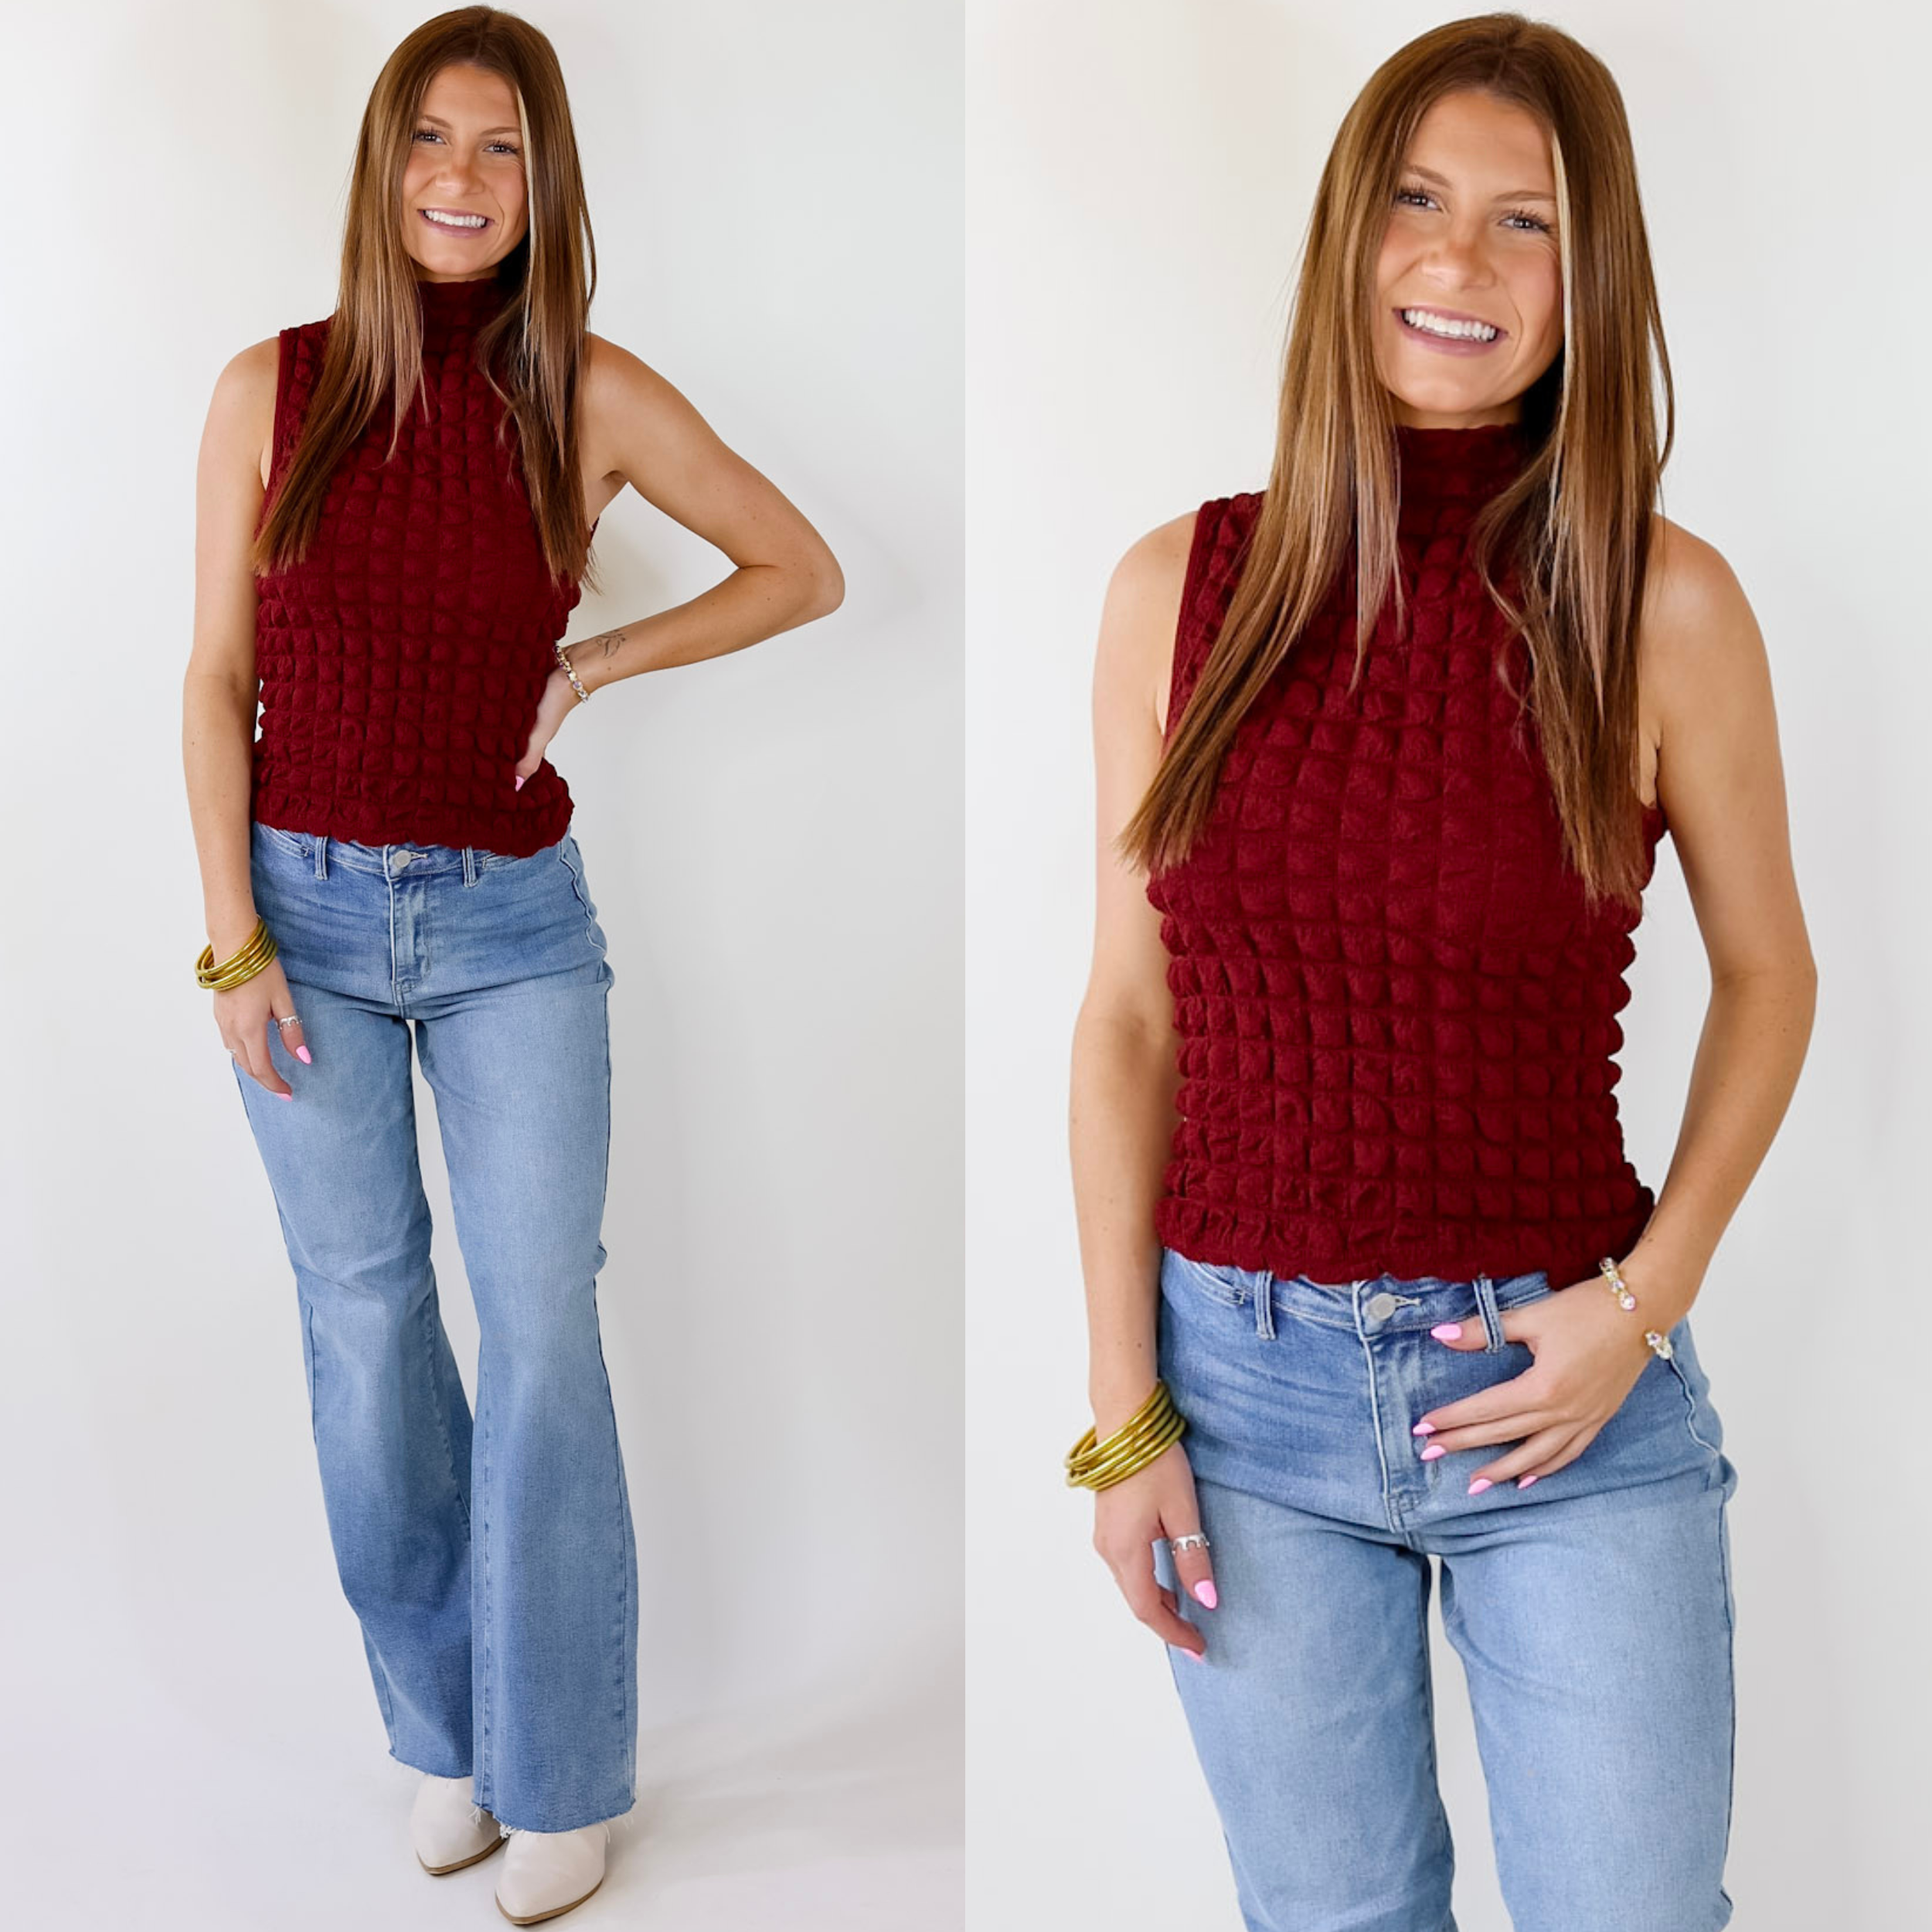 Model is wearing a maroon mock neck tank top. Model has this top paired with light wash jeans, white booties, and gold jewelry.